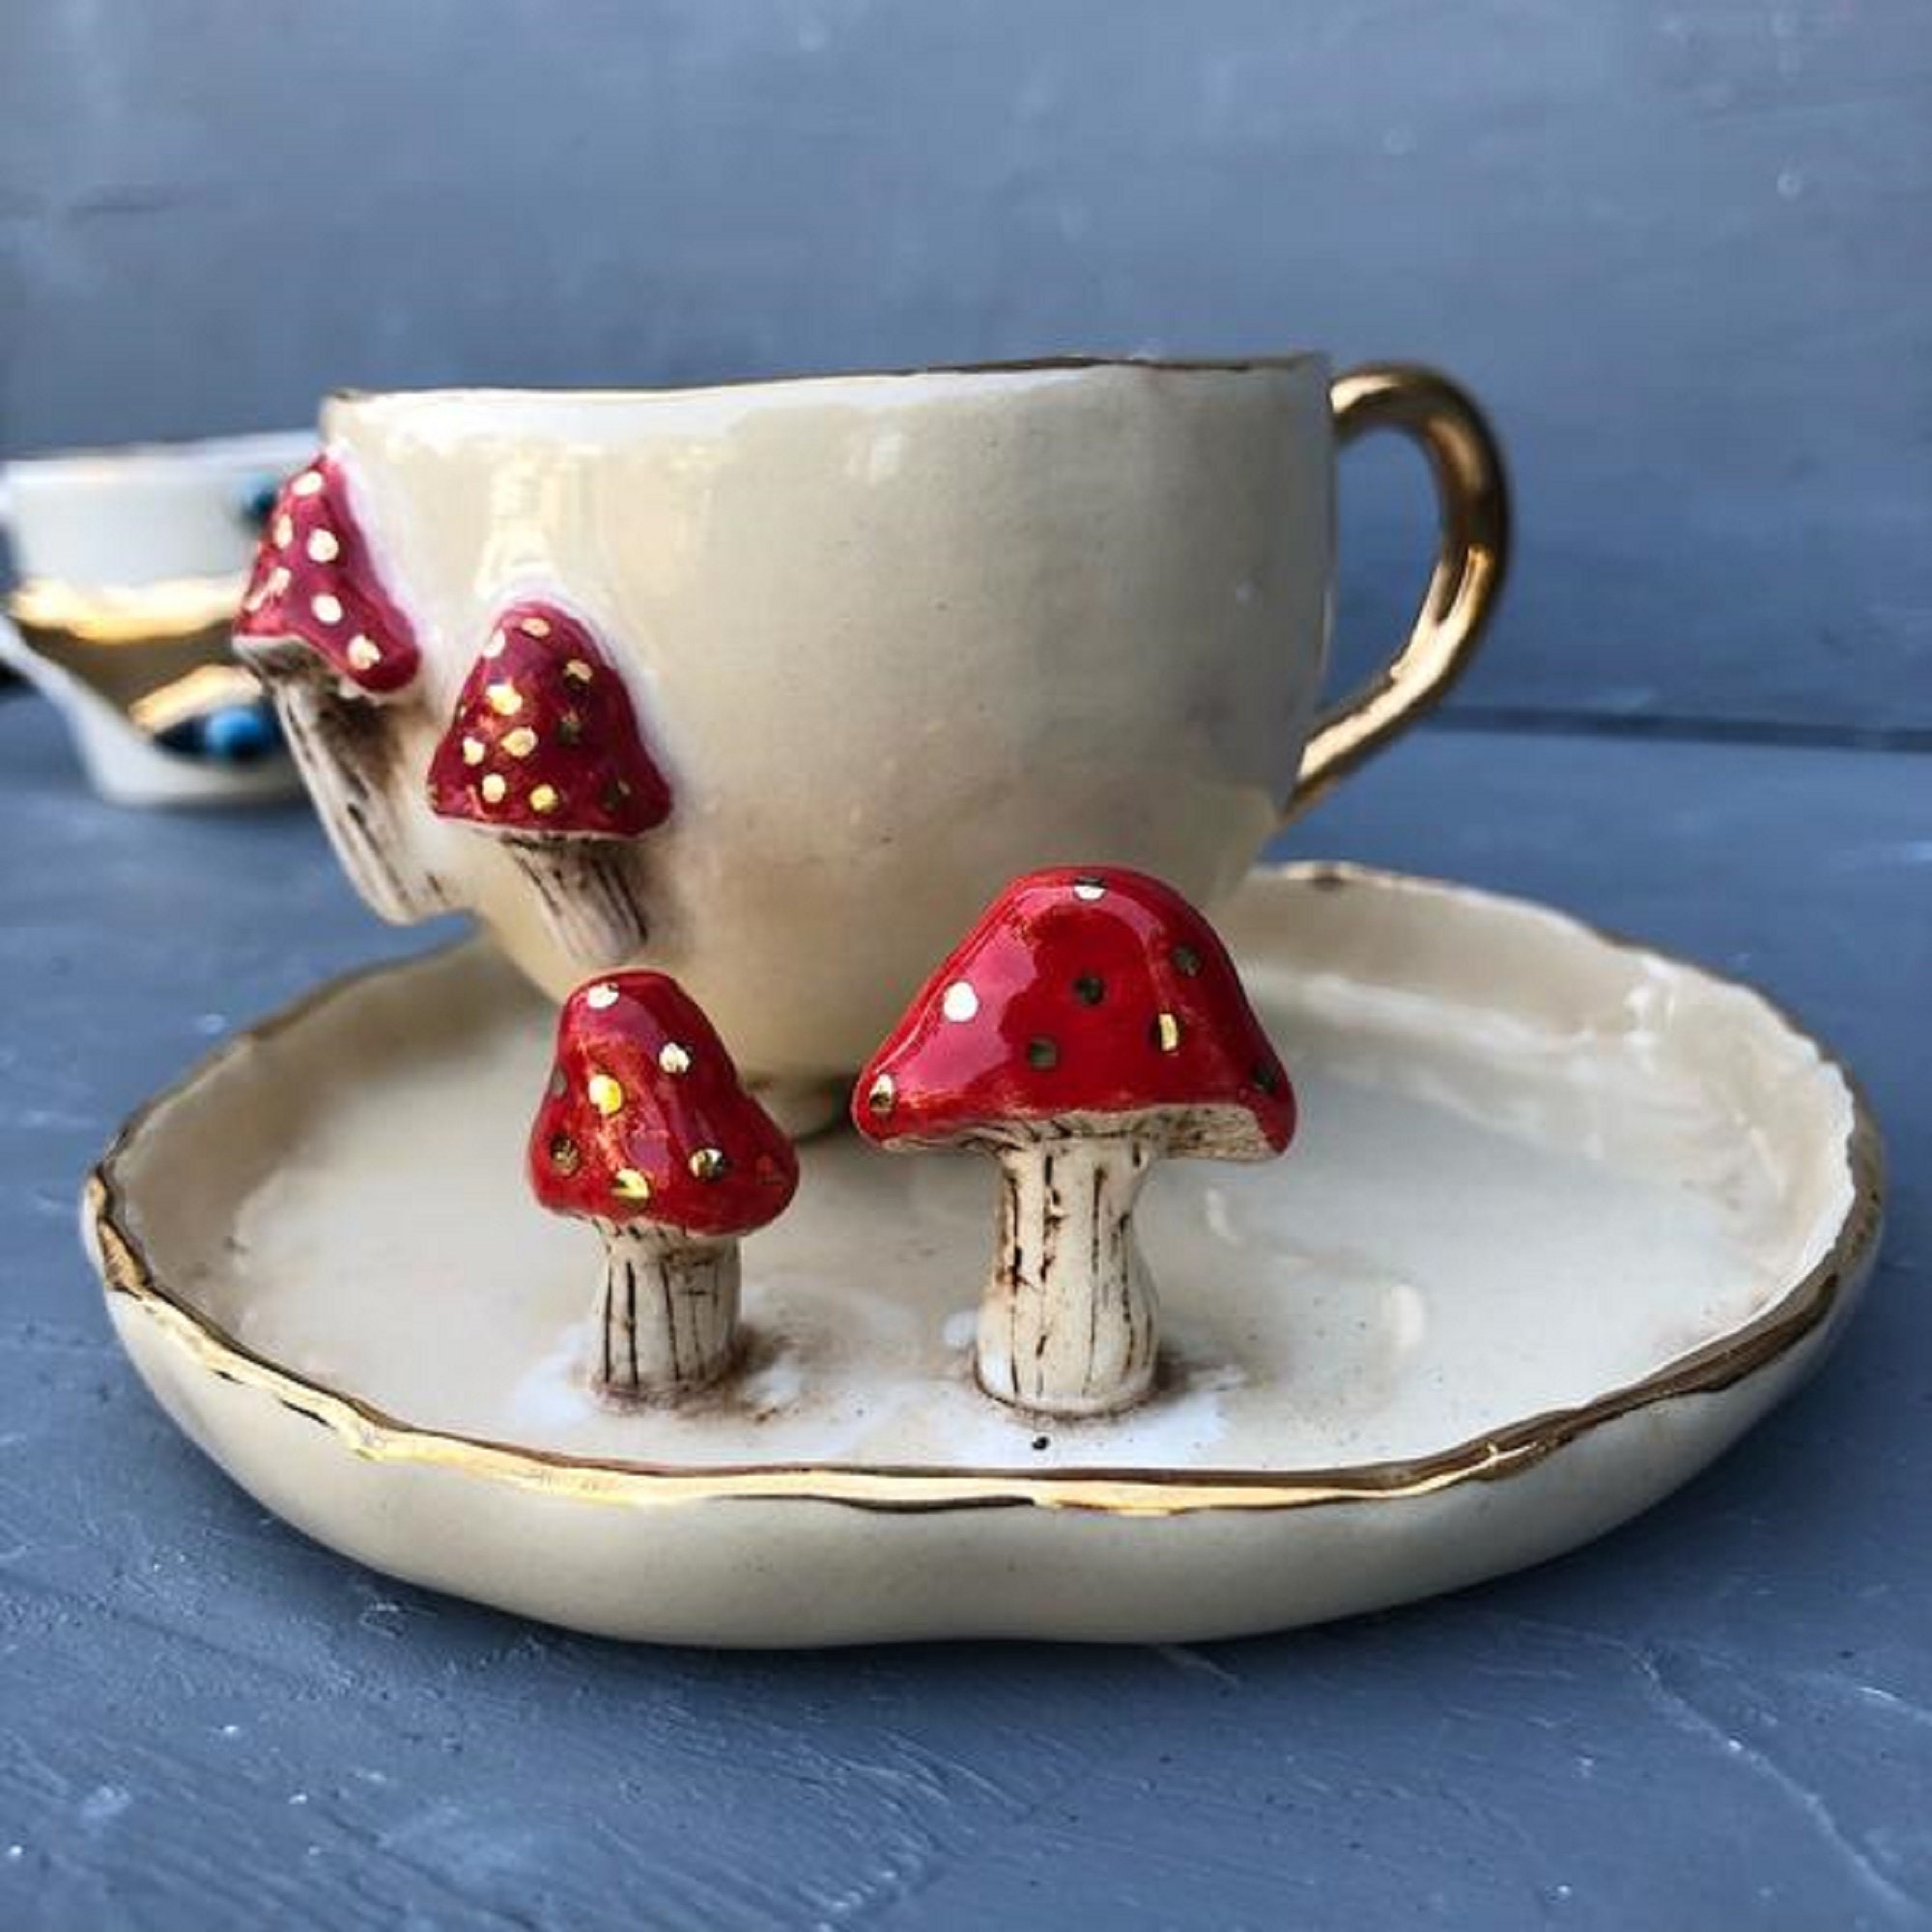 Mushroom Tea Cup Personalized Tea Cup Set 2pc Hand Painted 